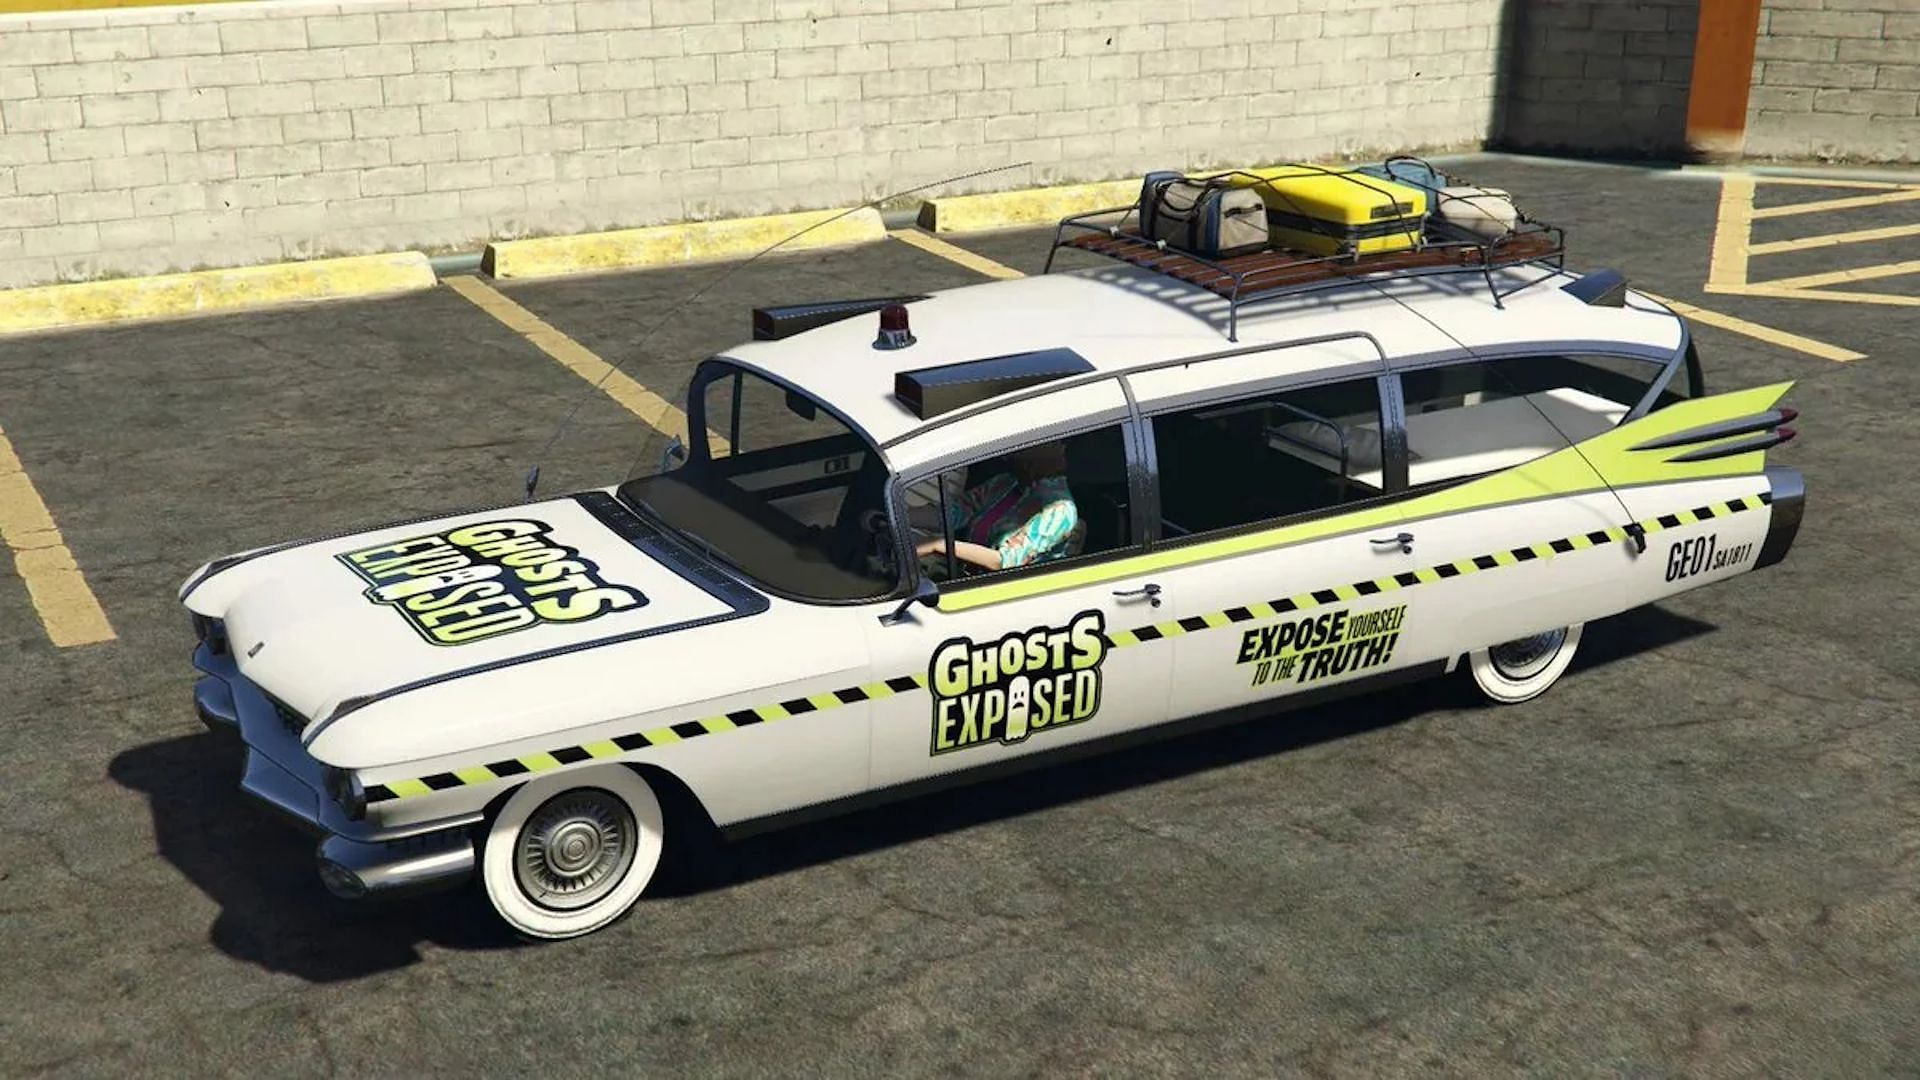 This is what the free livery looks like (Image via Rockstar Games)